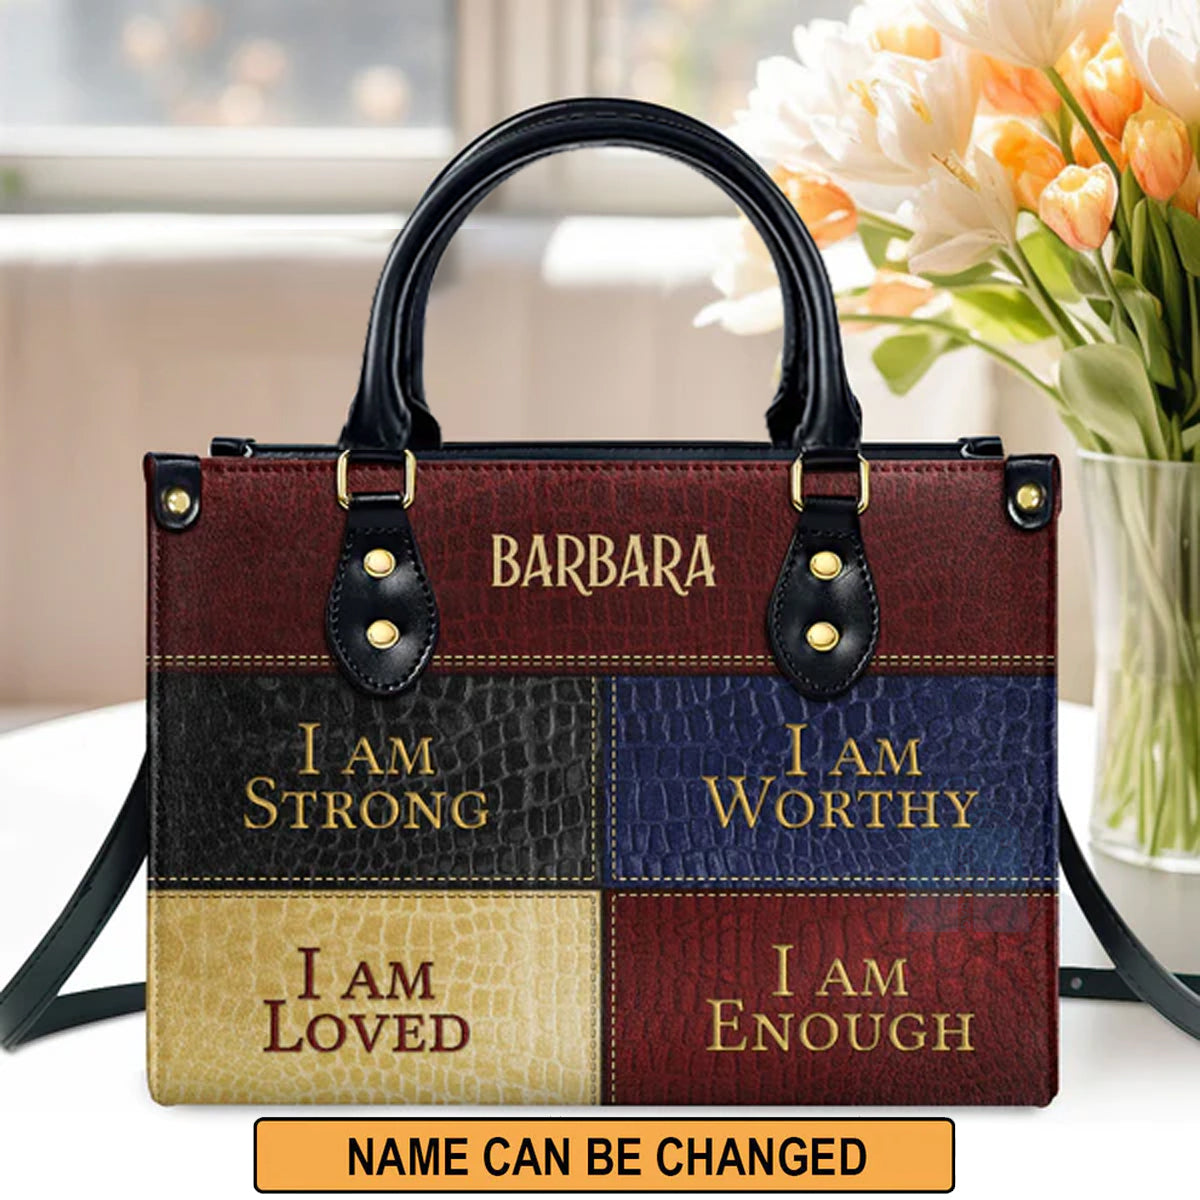 Christianartbag Handbags, I Am Enough, I Am Loved, Personalized Bags, Gifts for Women, Christmas Gift, CABLTB01290723. - Christian Art Bag